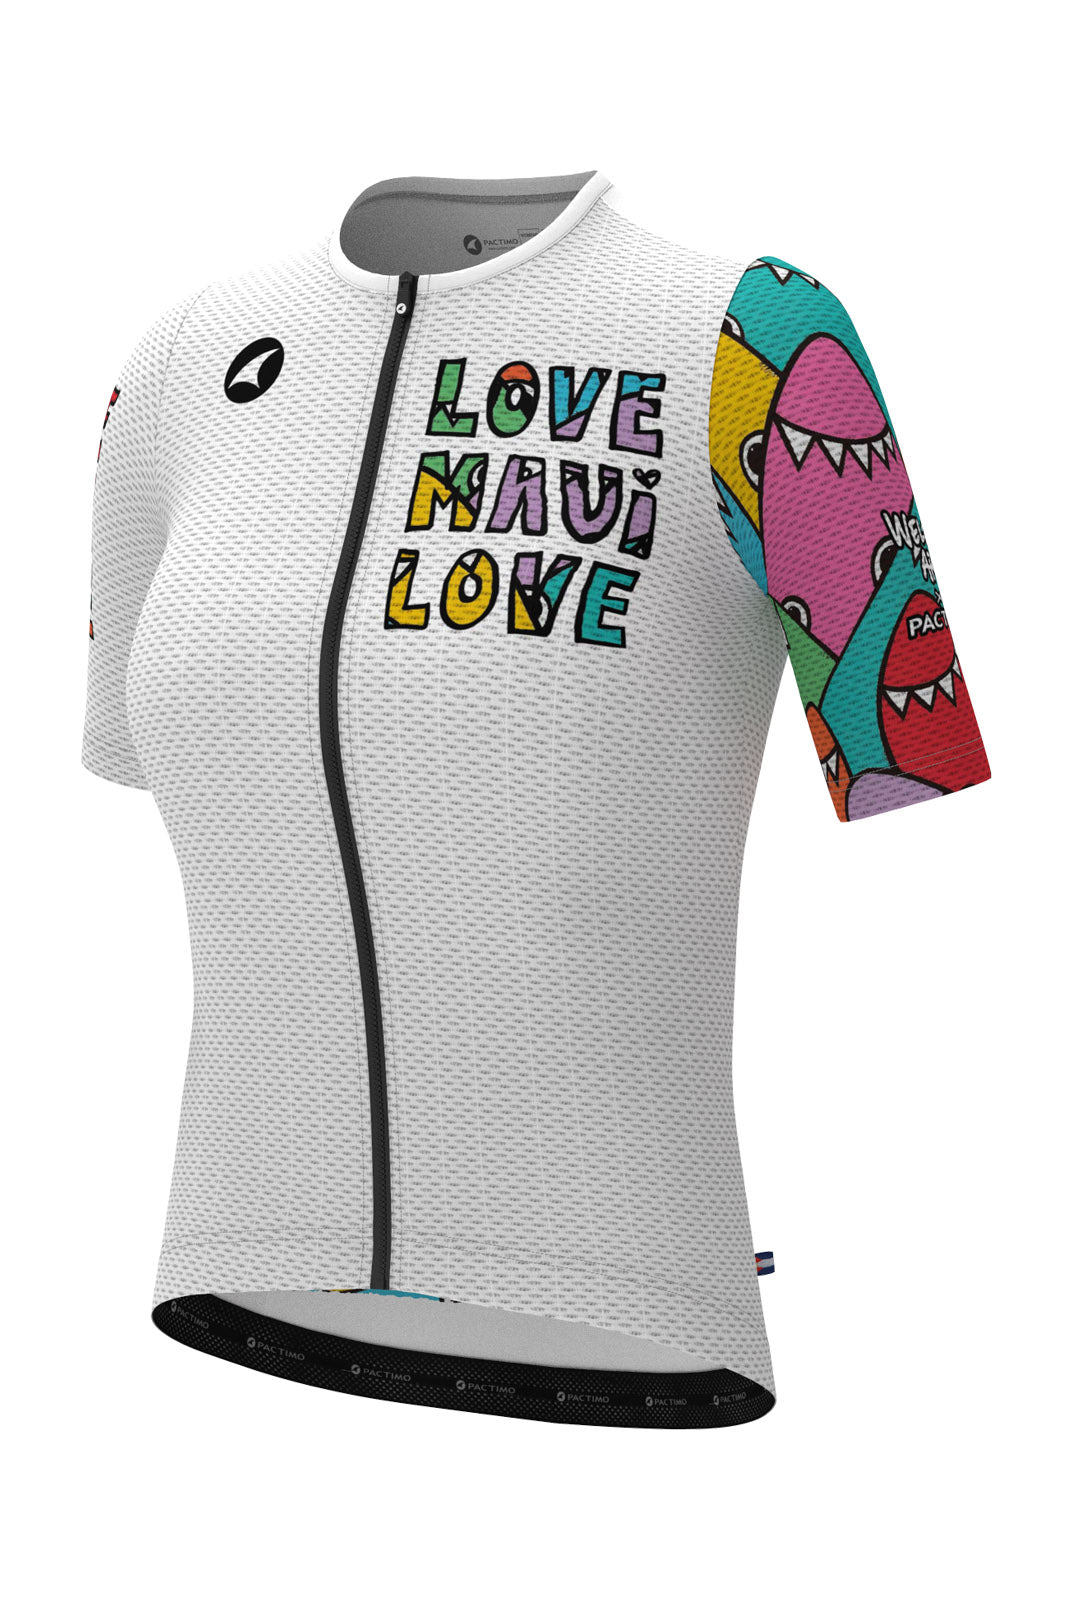 Women's Summer Cycling Jersey - White Welzie Design - Front View  #color_love-maui-love-white